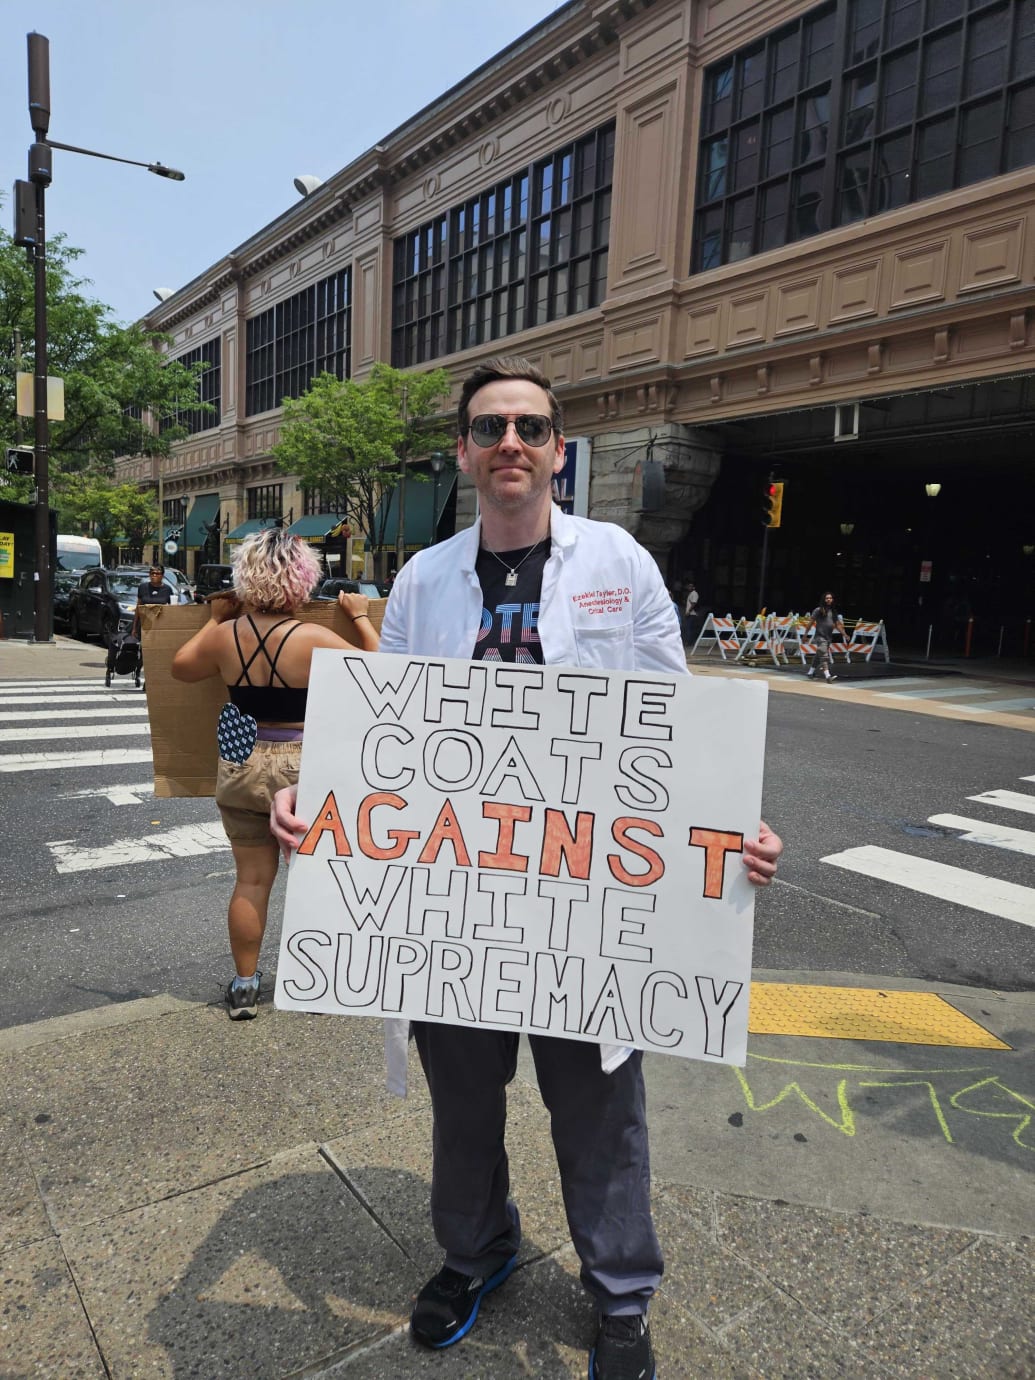 A doctor protested against Moms For Liberty at the group’s summit in Philadelphia.